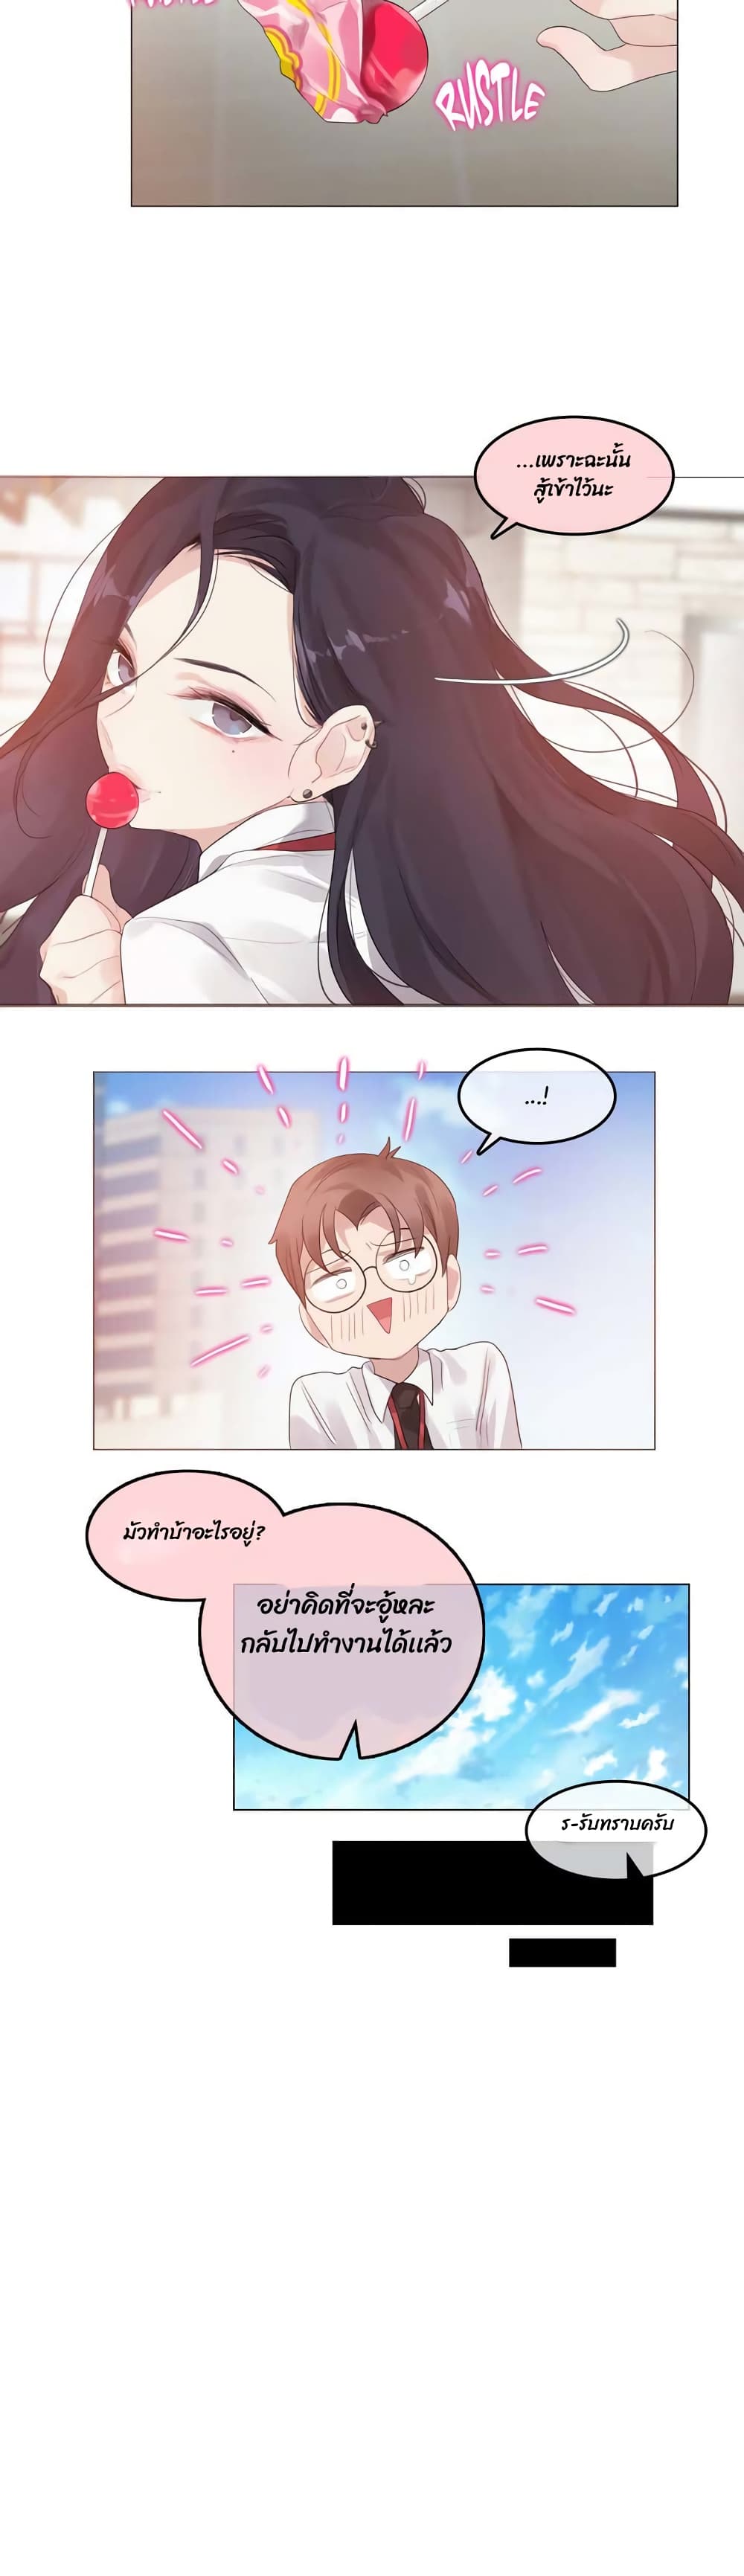 A Pervert's Daily Life 92 (18)